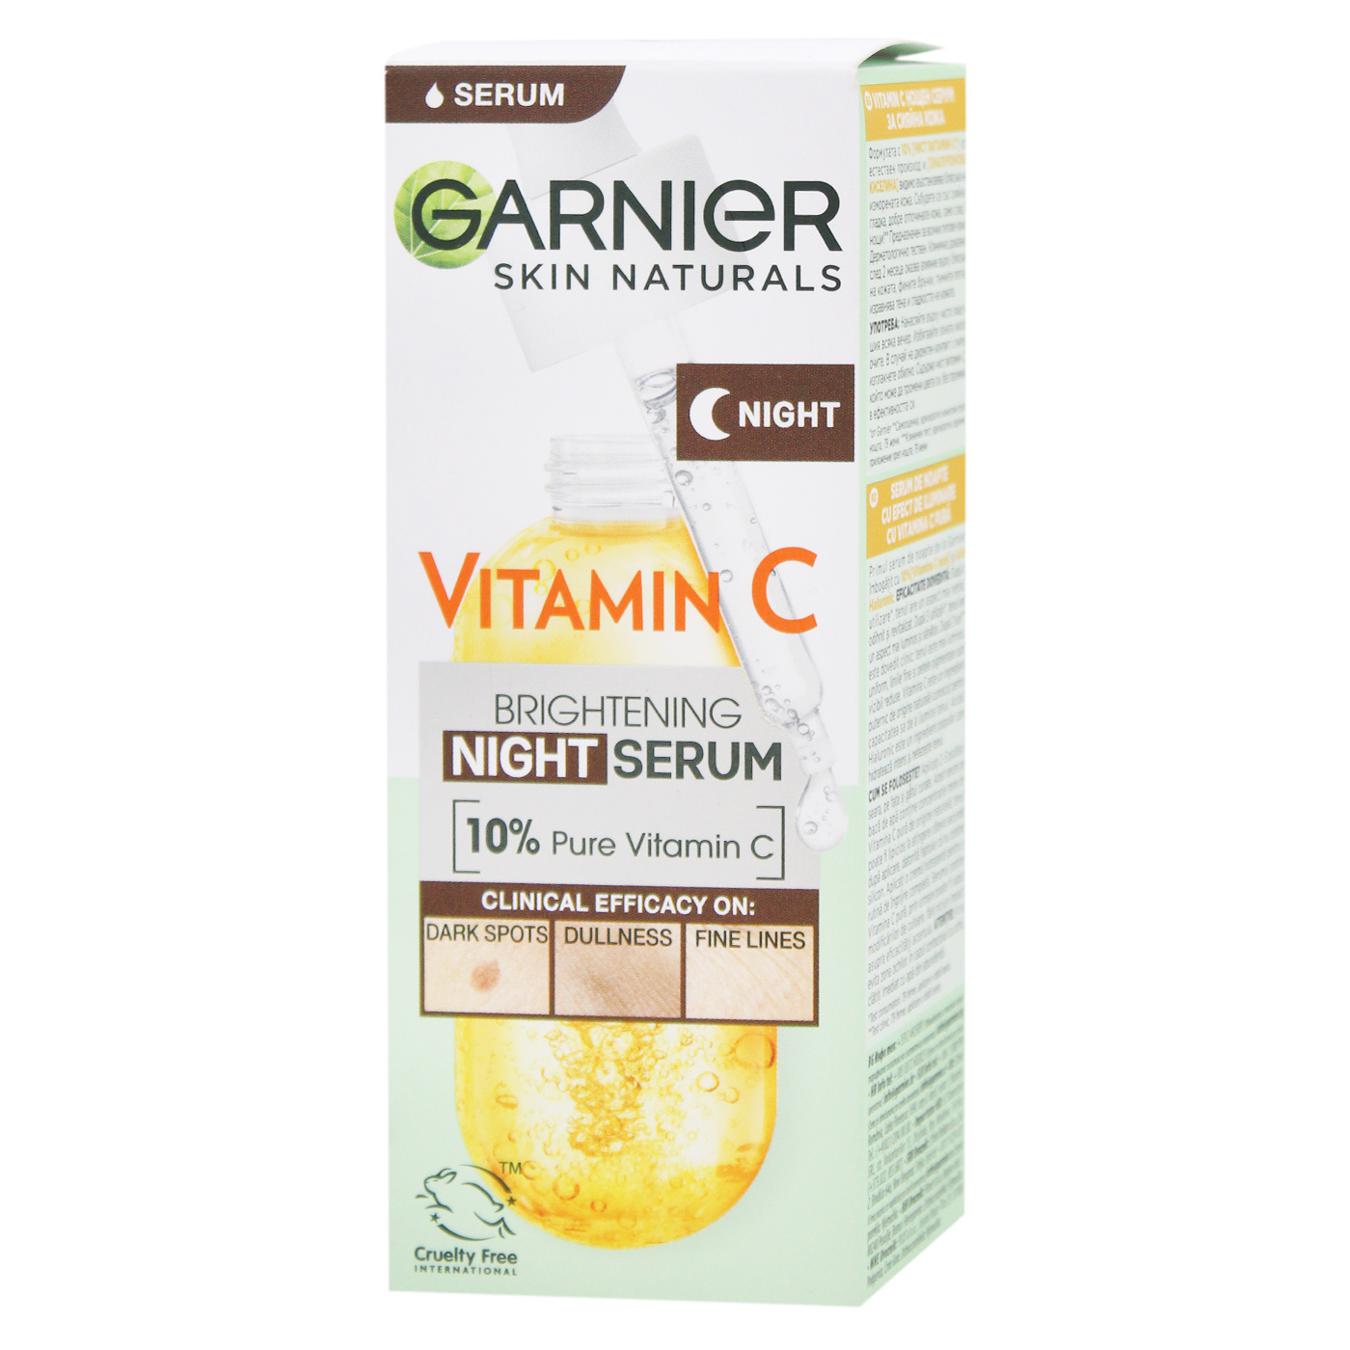 Garnier 3 skin naturals night serum with vitamin C to reduce the appearance of age spots